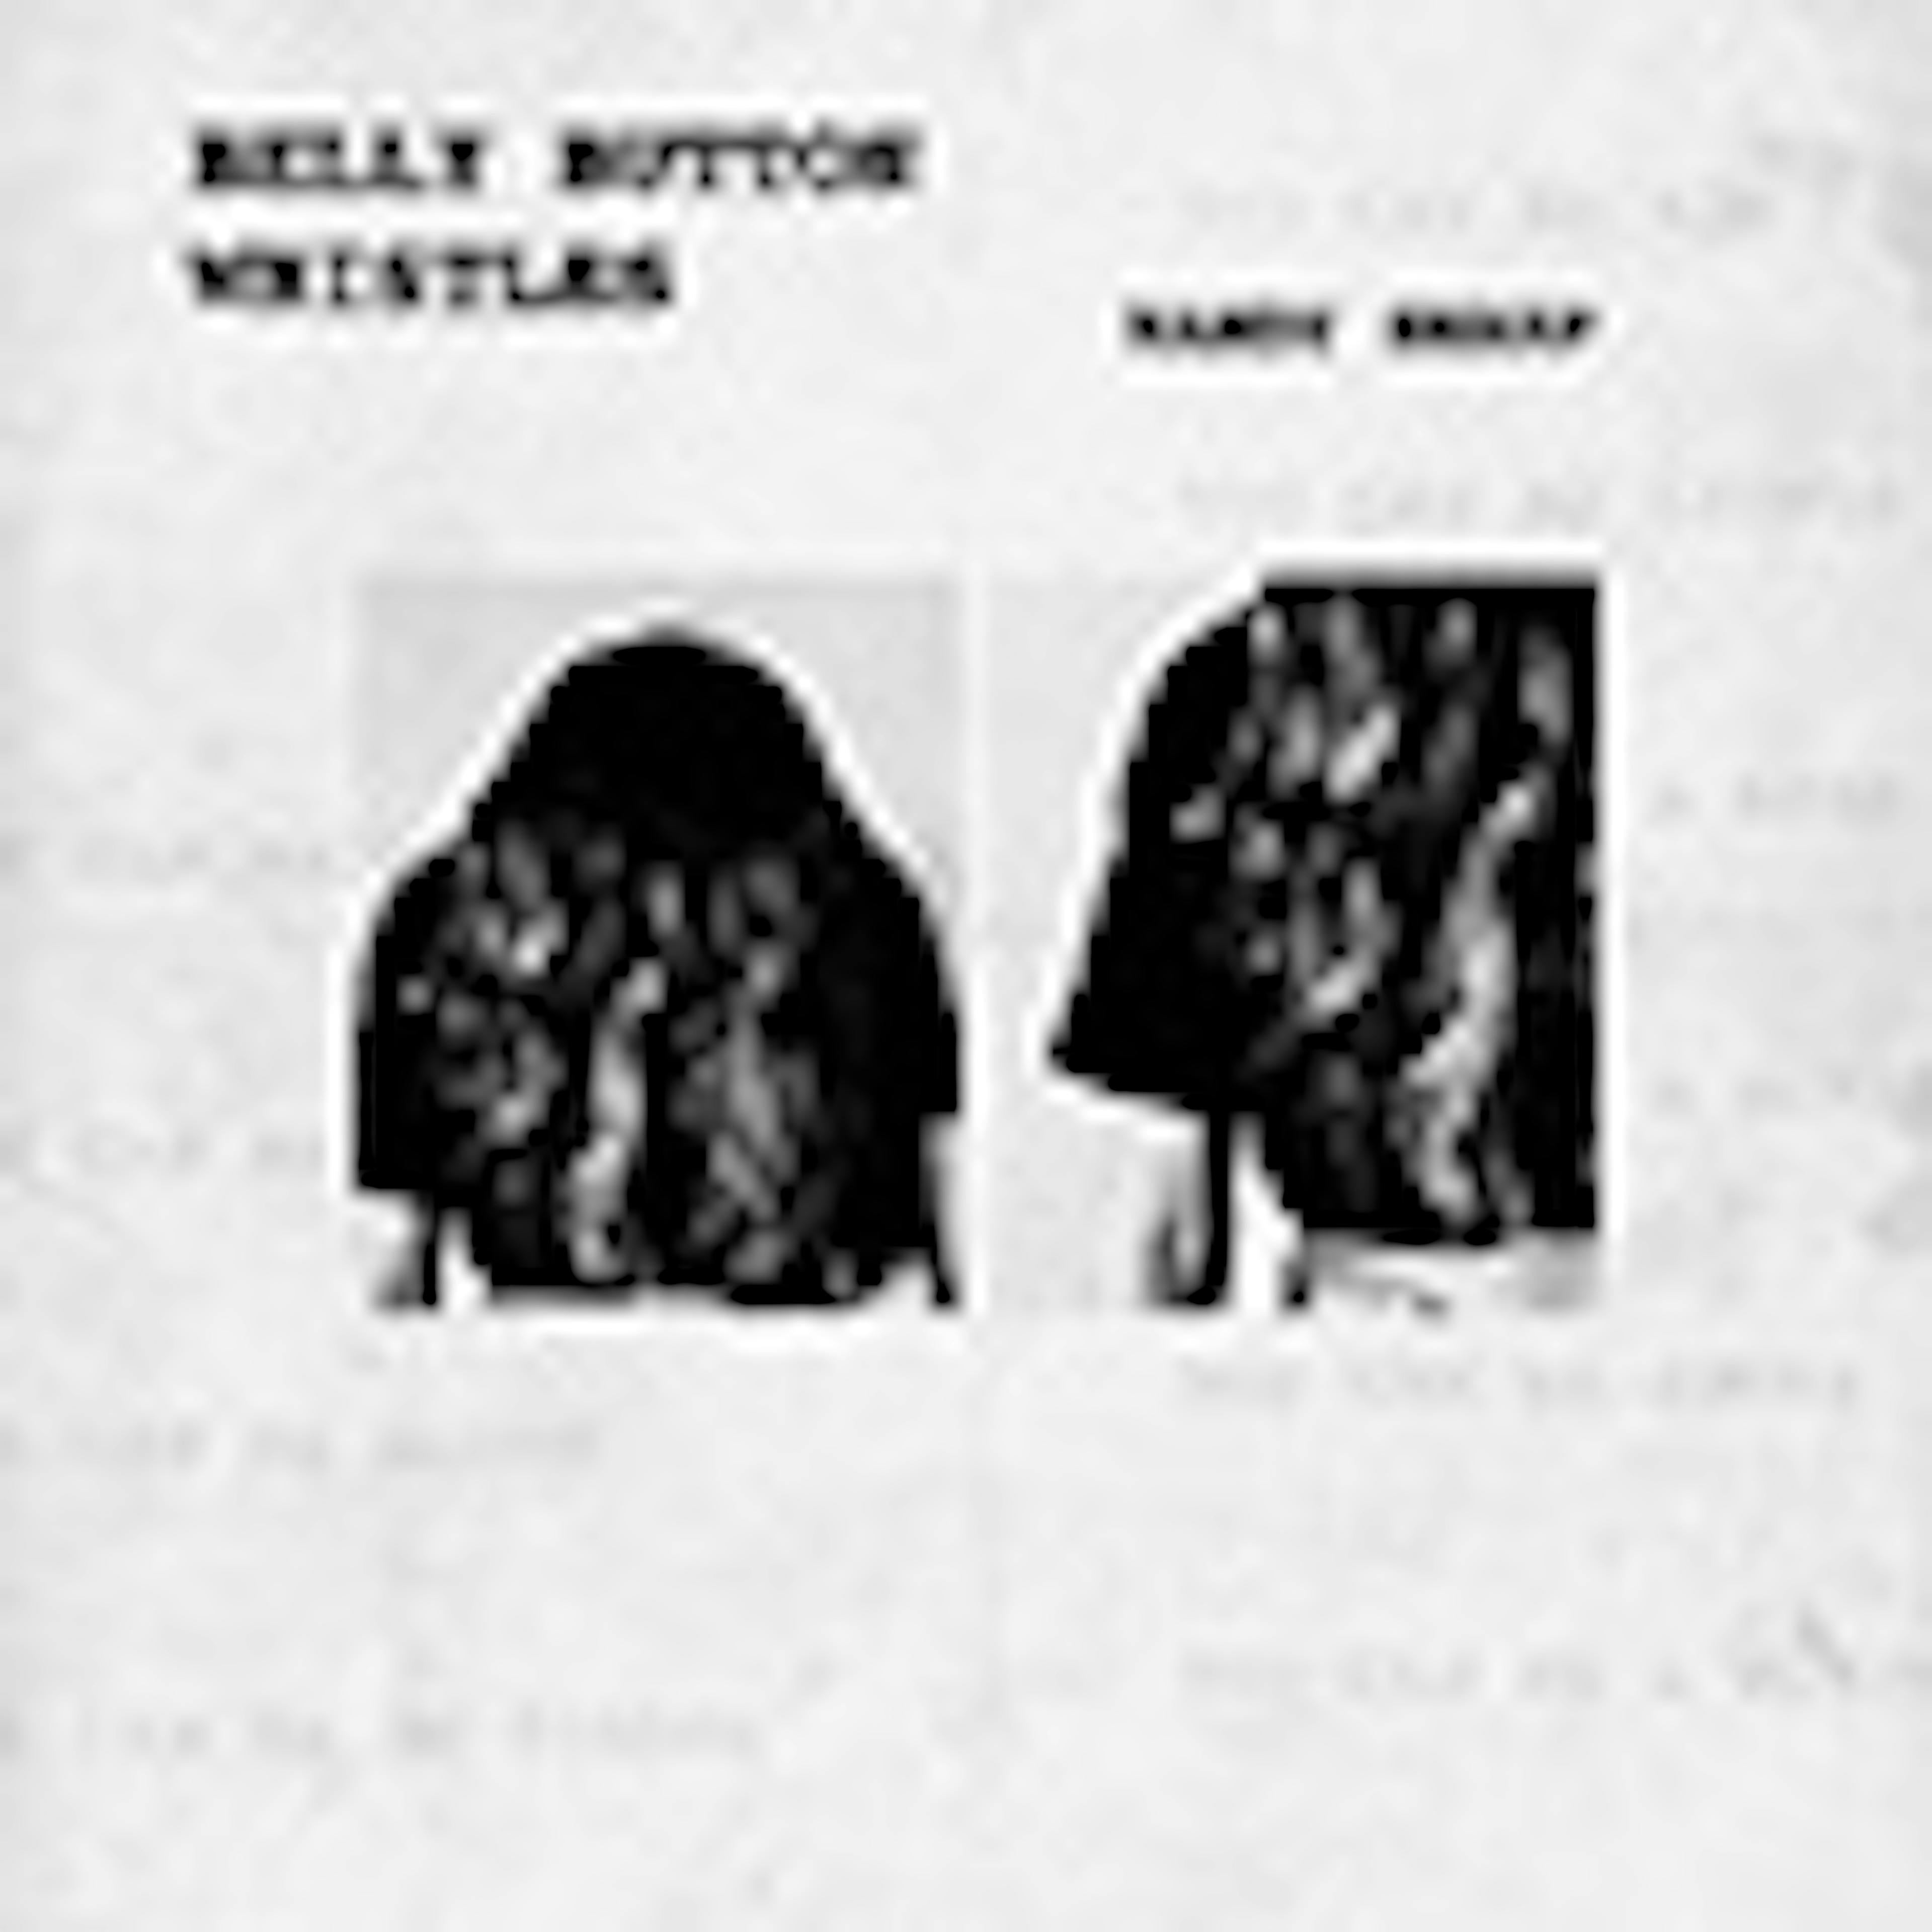 Belly Button Whistles album cover